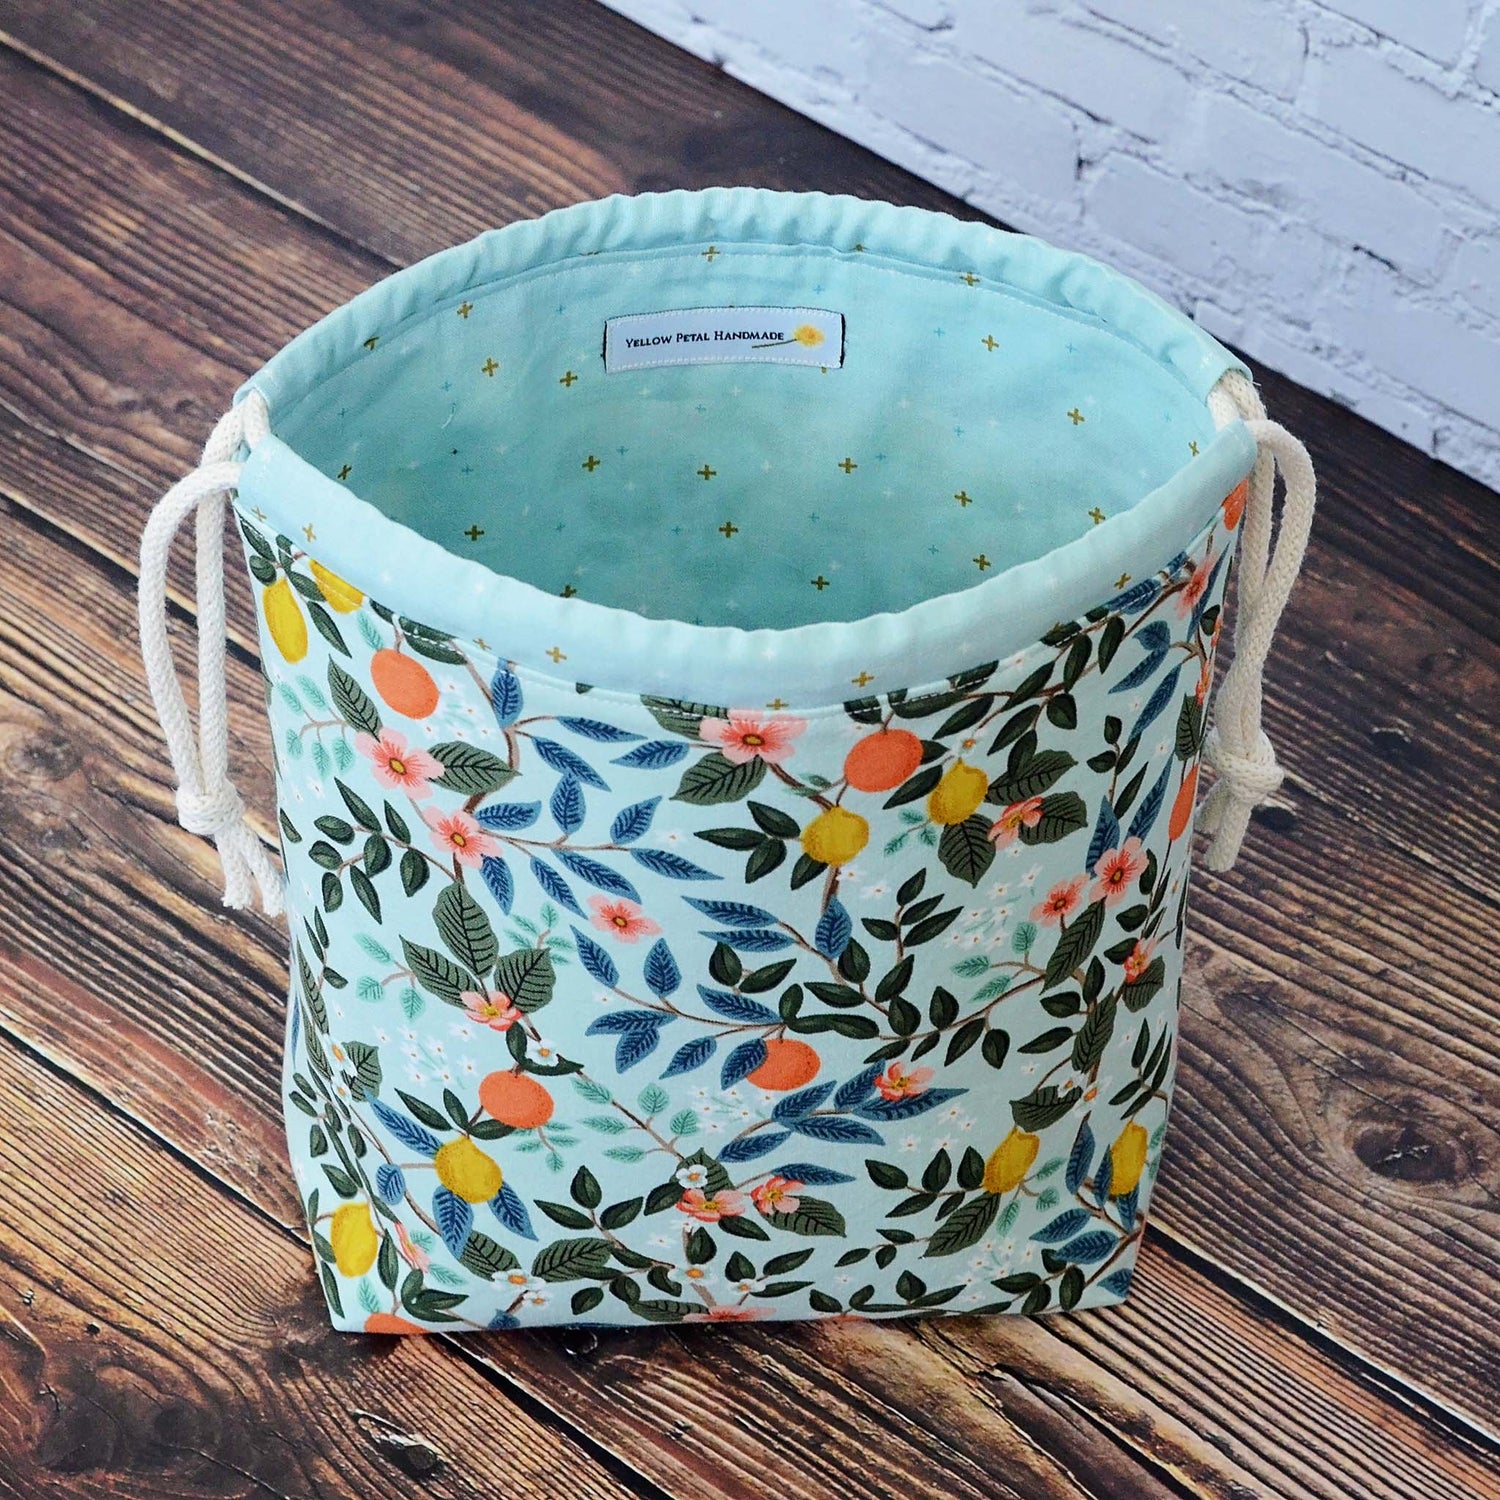 Pretty aqua citrus and floral project bag in Rifle Paper co's Bramble fabric collection.  Made in Canada by Yellow Petal Handmade.